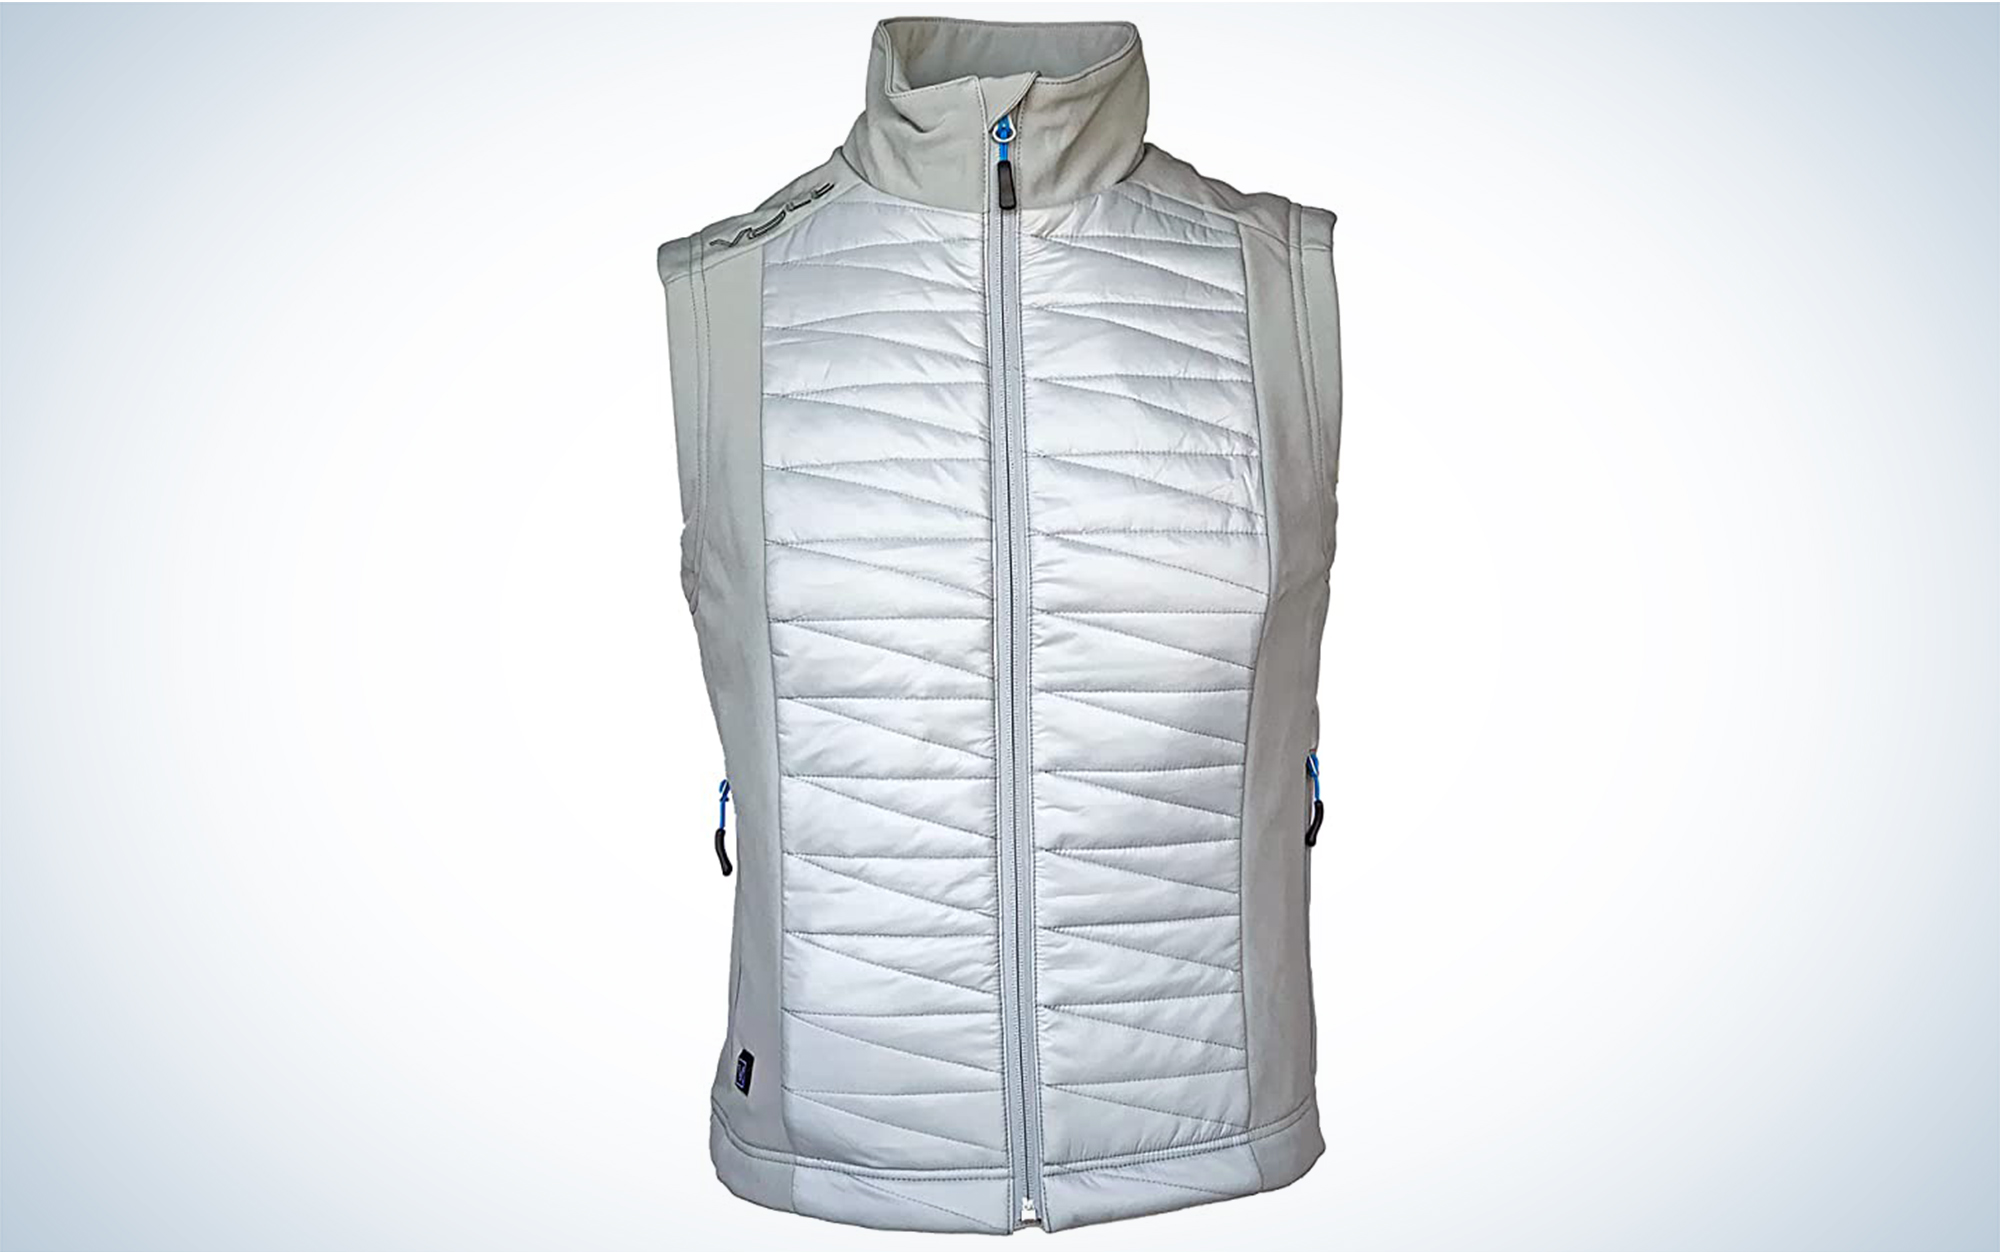 The Volt Resistance Vest is one of the best heated vests.